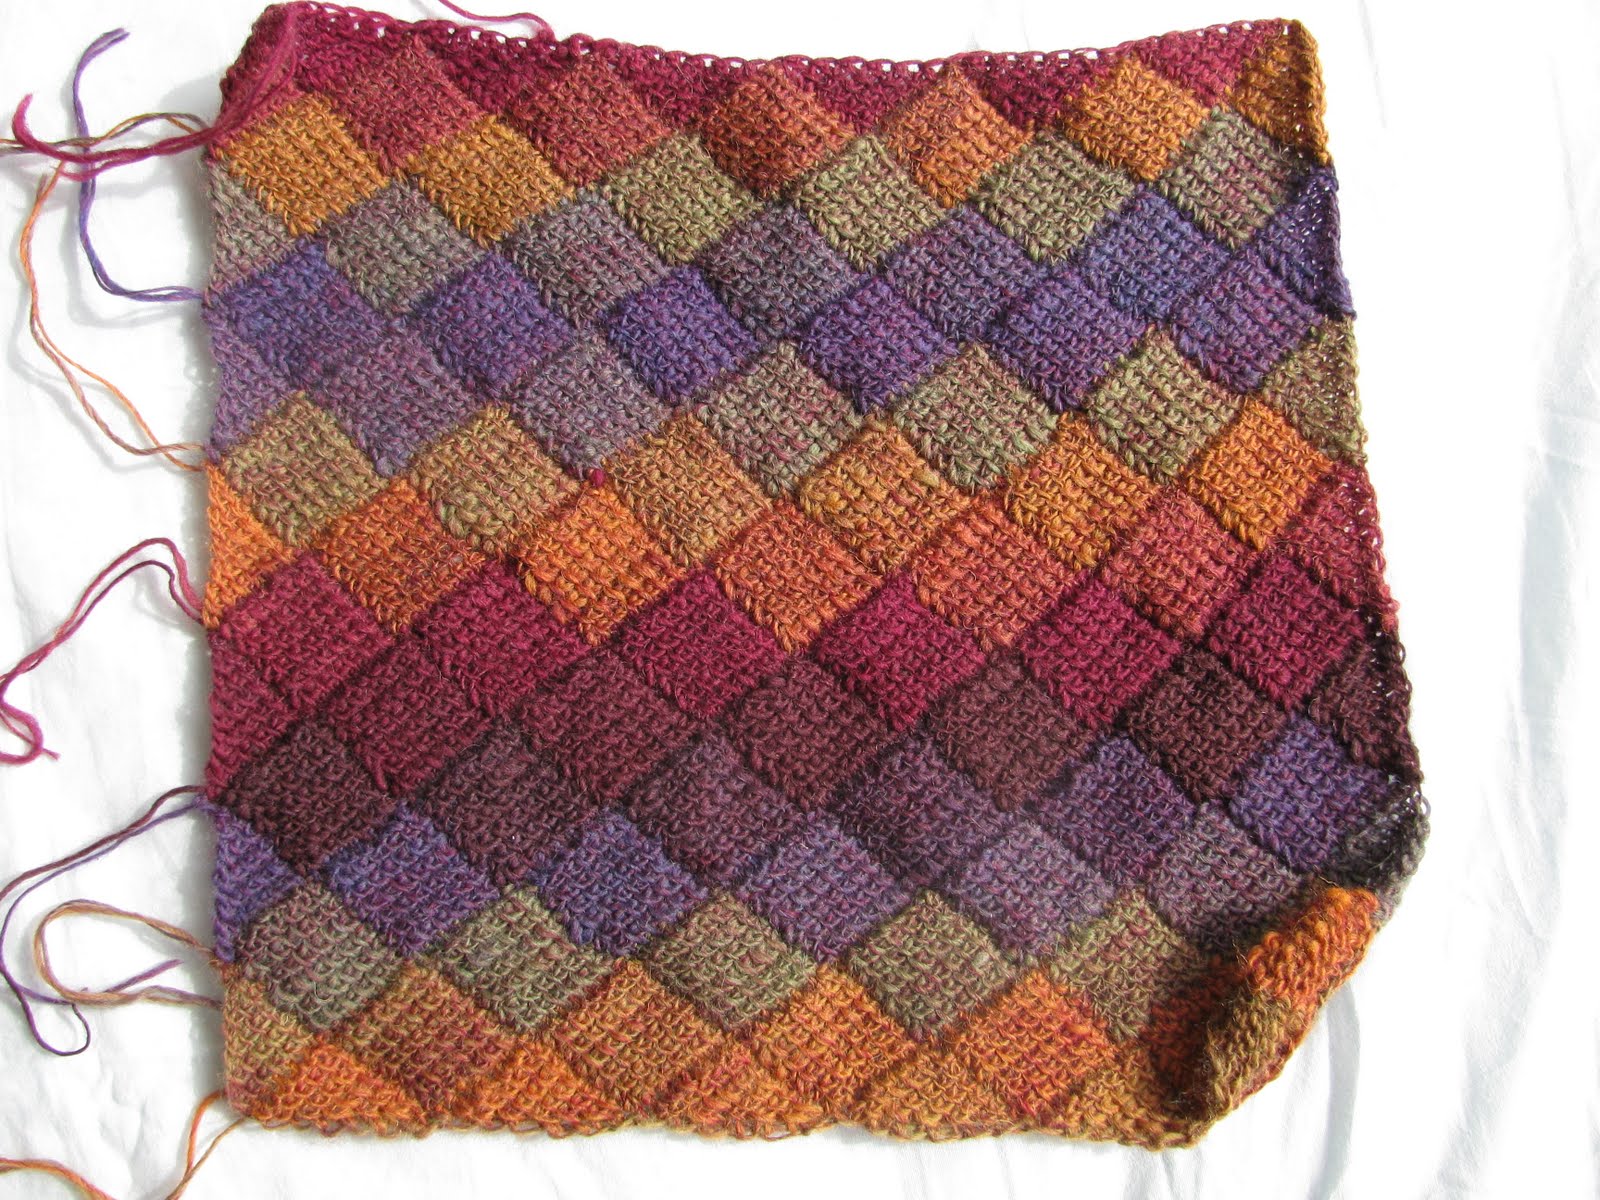 entrelac crochet you can create entrelac fabric in all sorts of different ways - knitting,  regular XEOTQXY